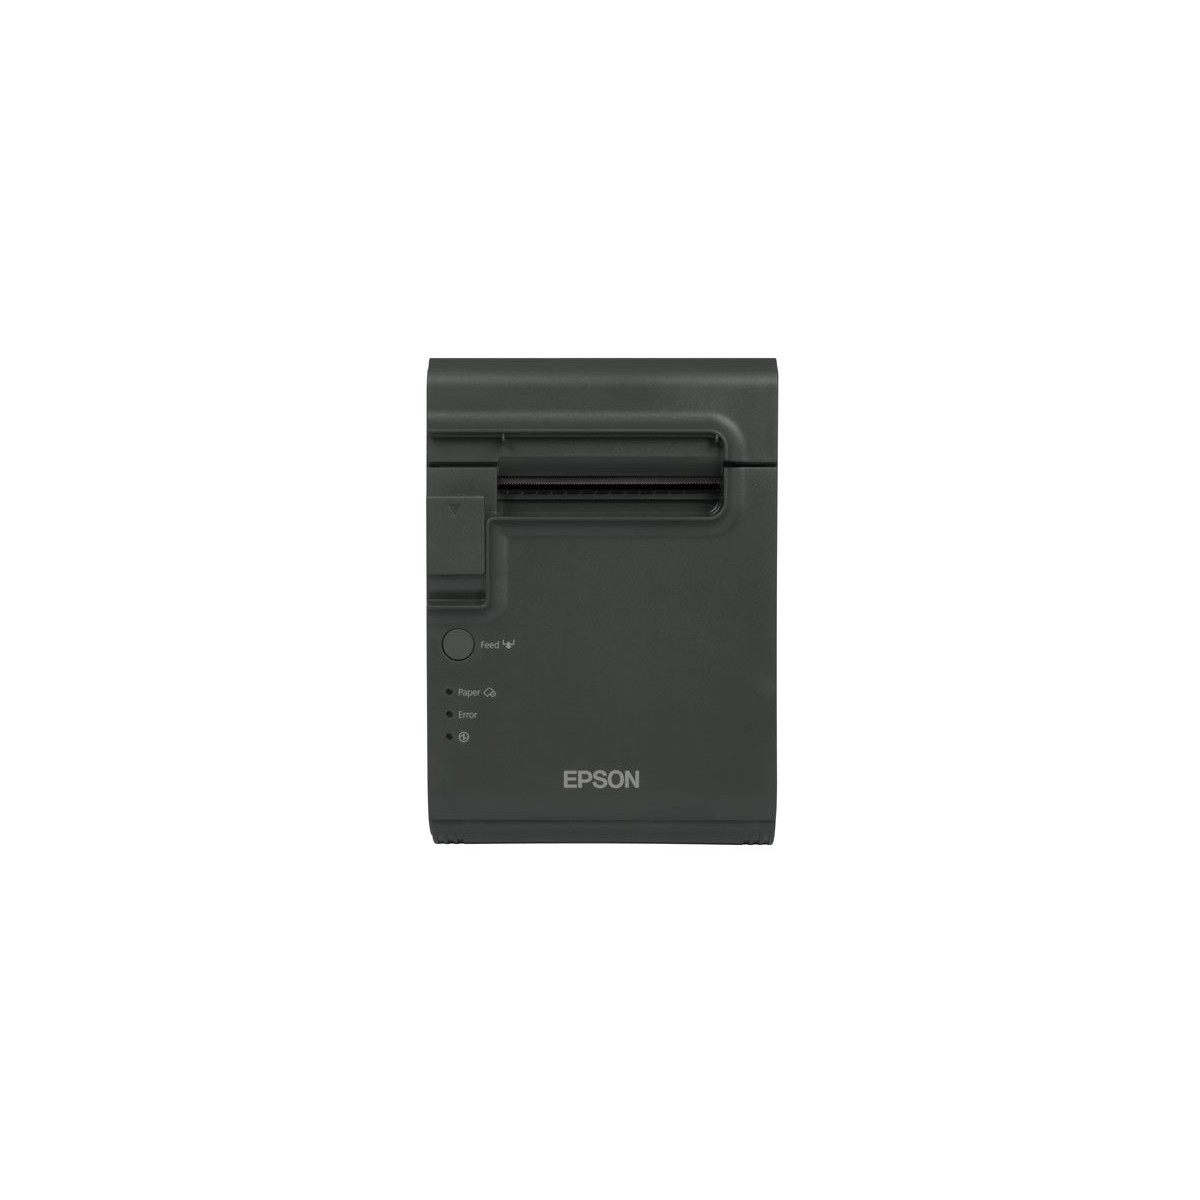 Epson TM-L90 (465) - Direct thermal - 203 x 203 DPI - 150 mm/sec - Wired - Grey